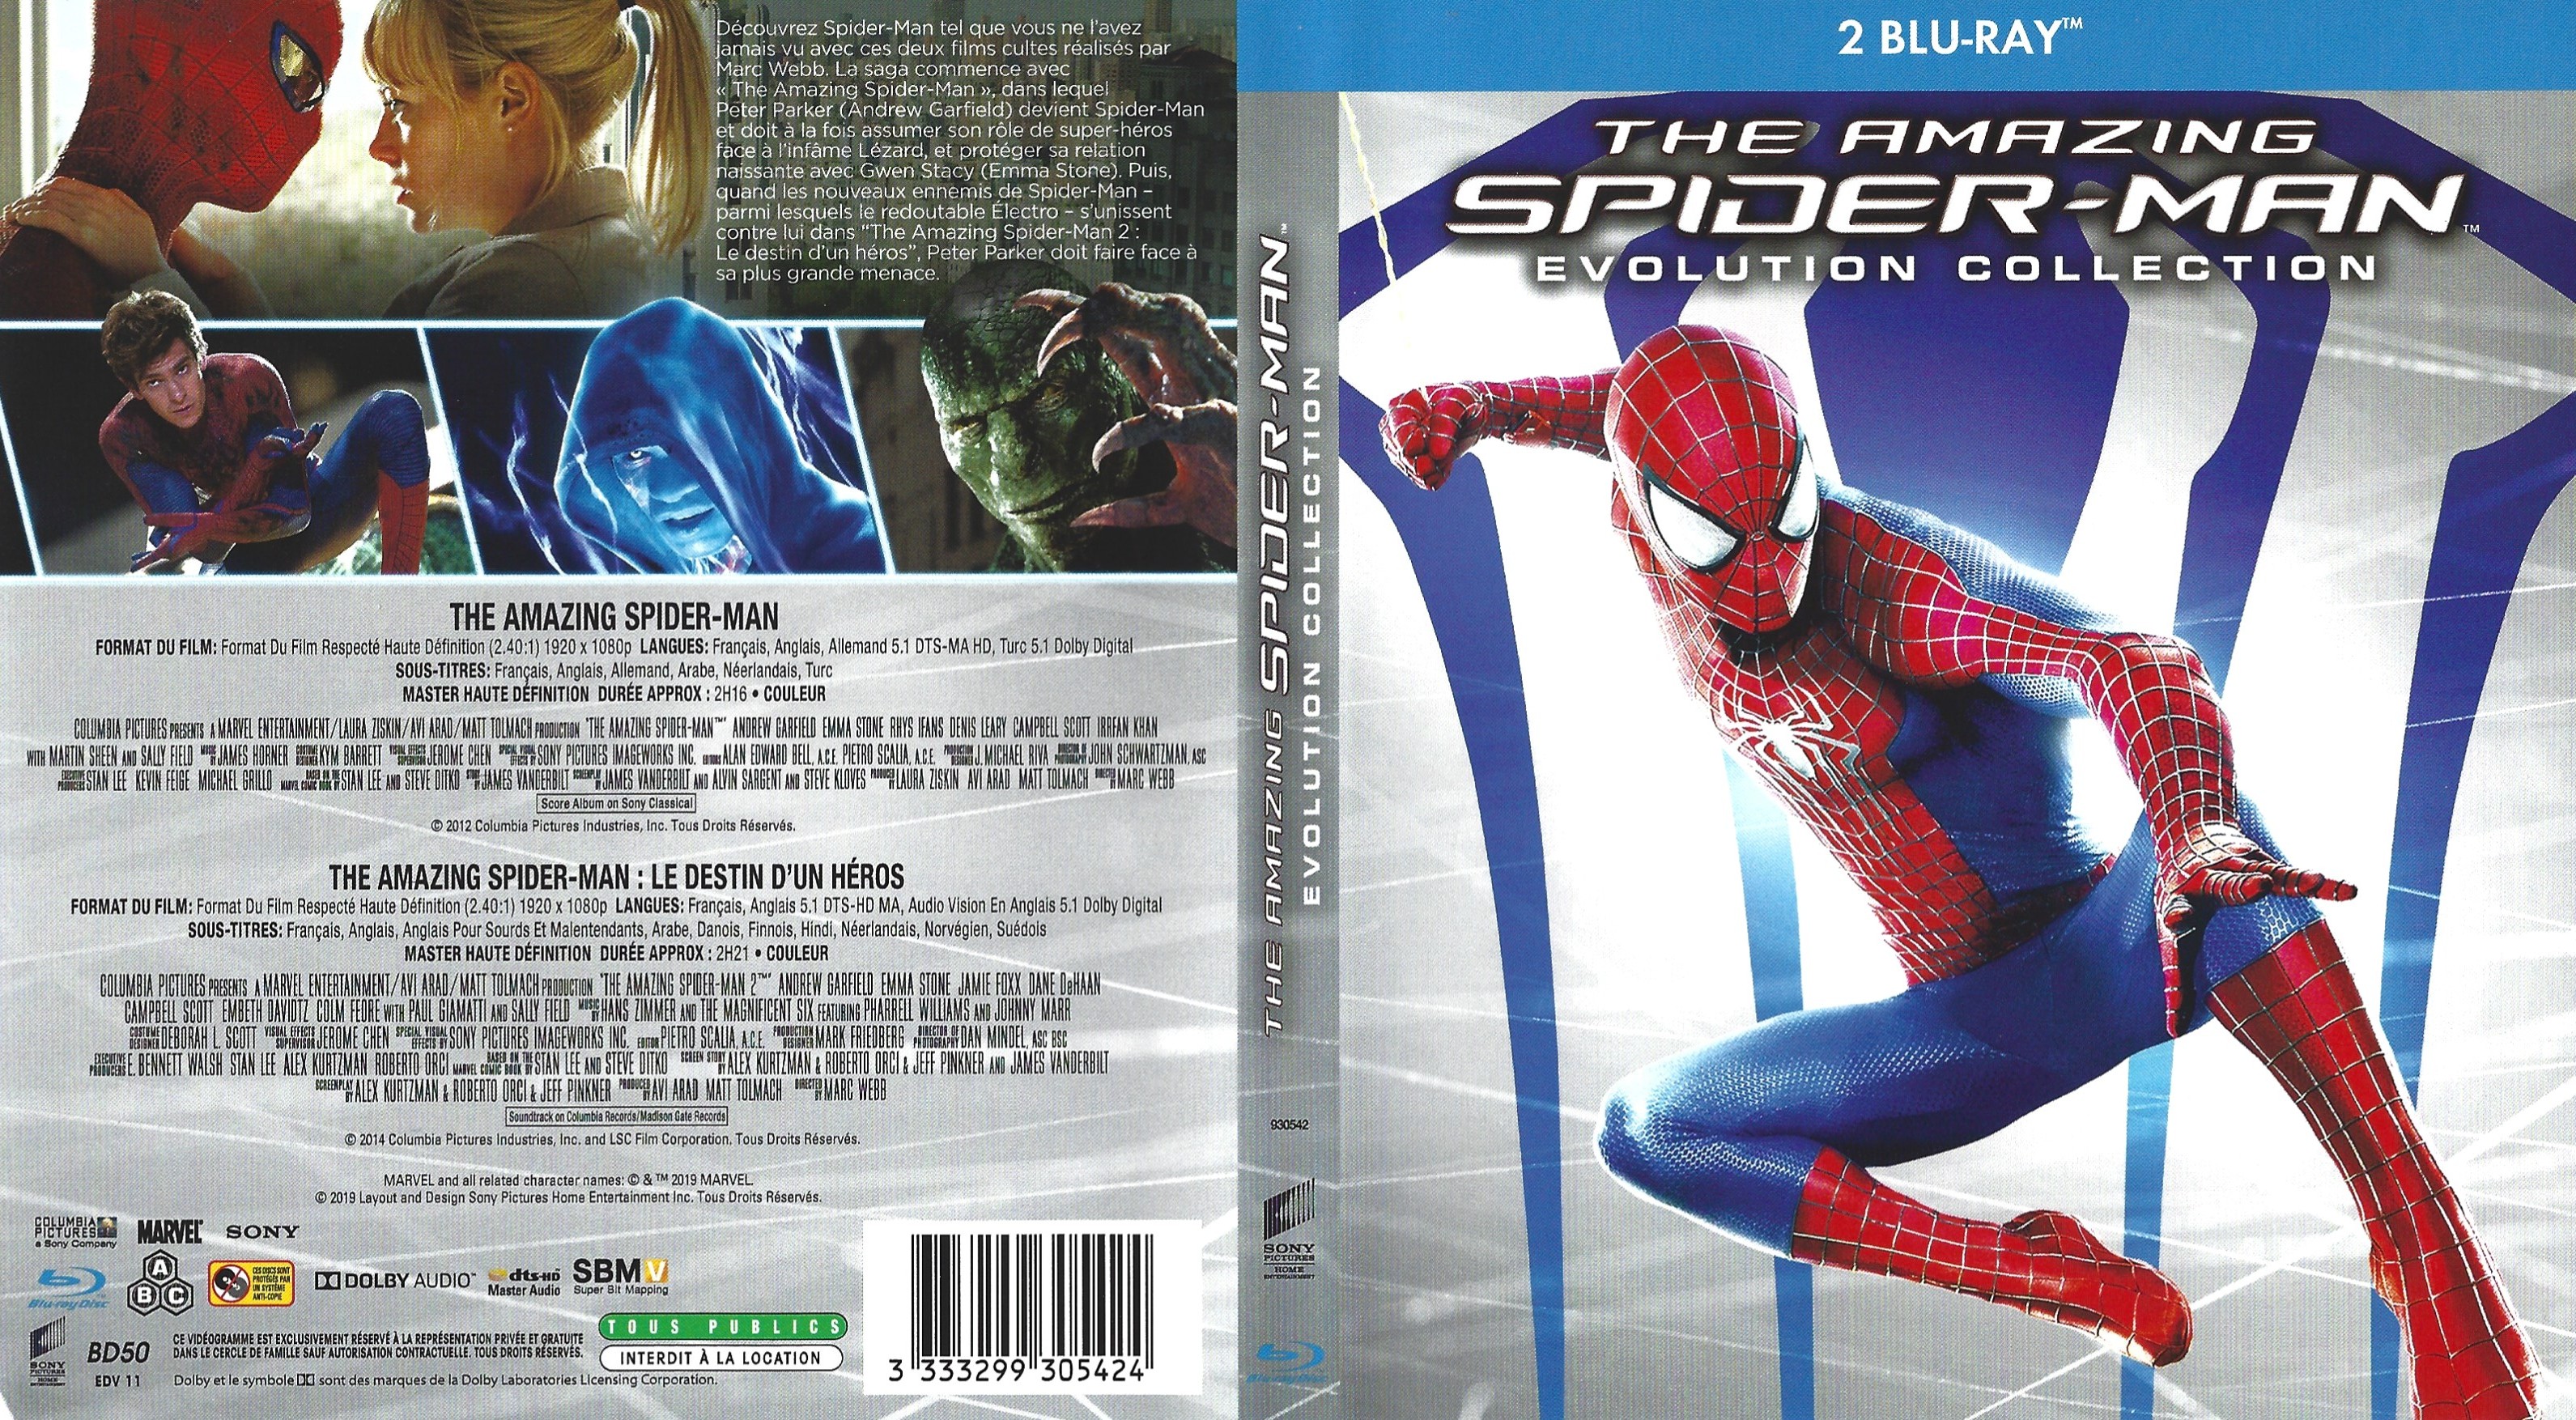 Jaquette DVD The Amazing Spider-Man Evolution Collection (BLU-RAY)